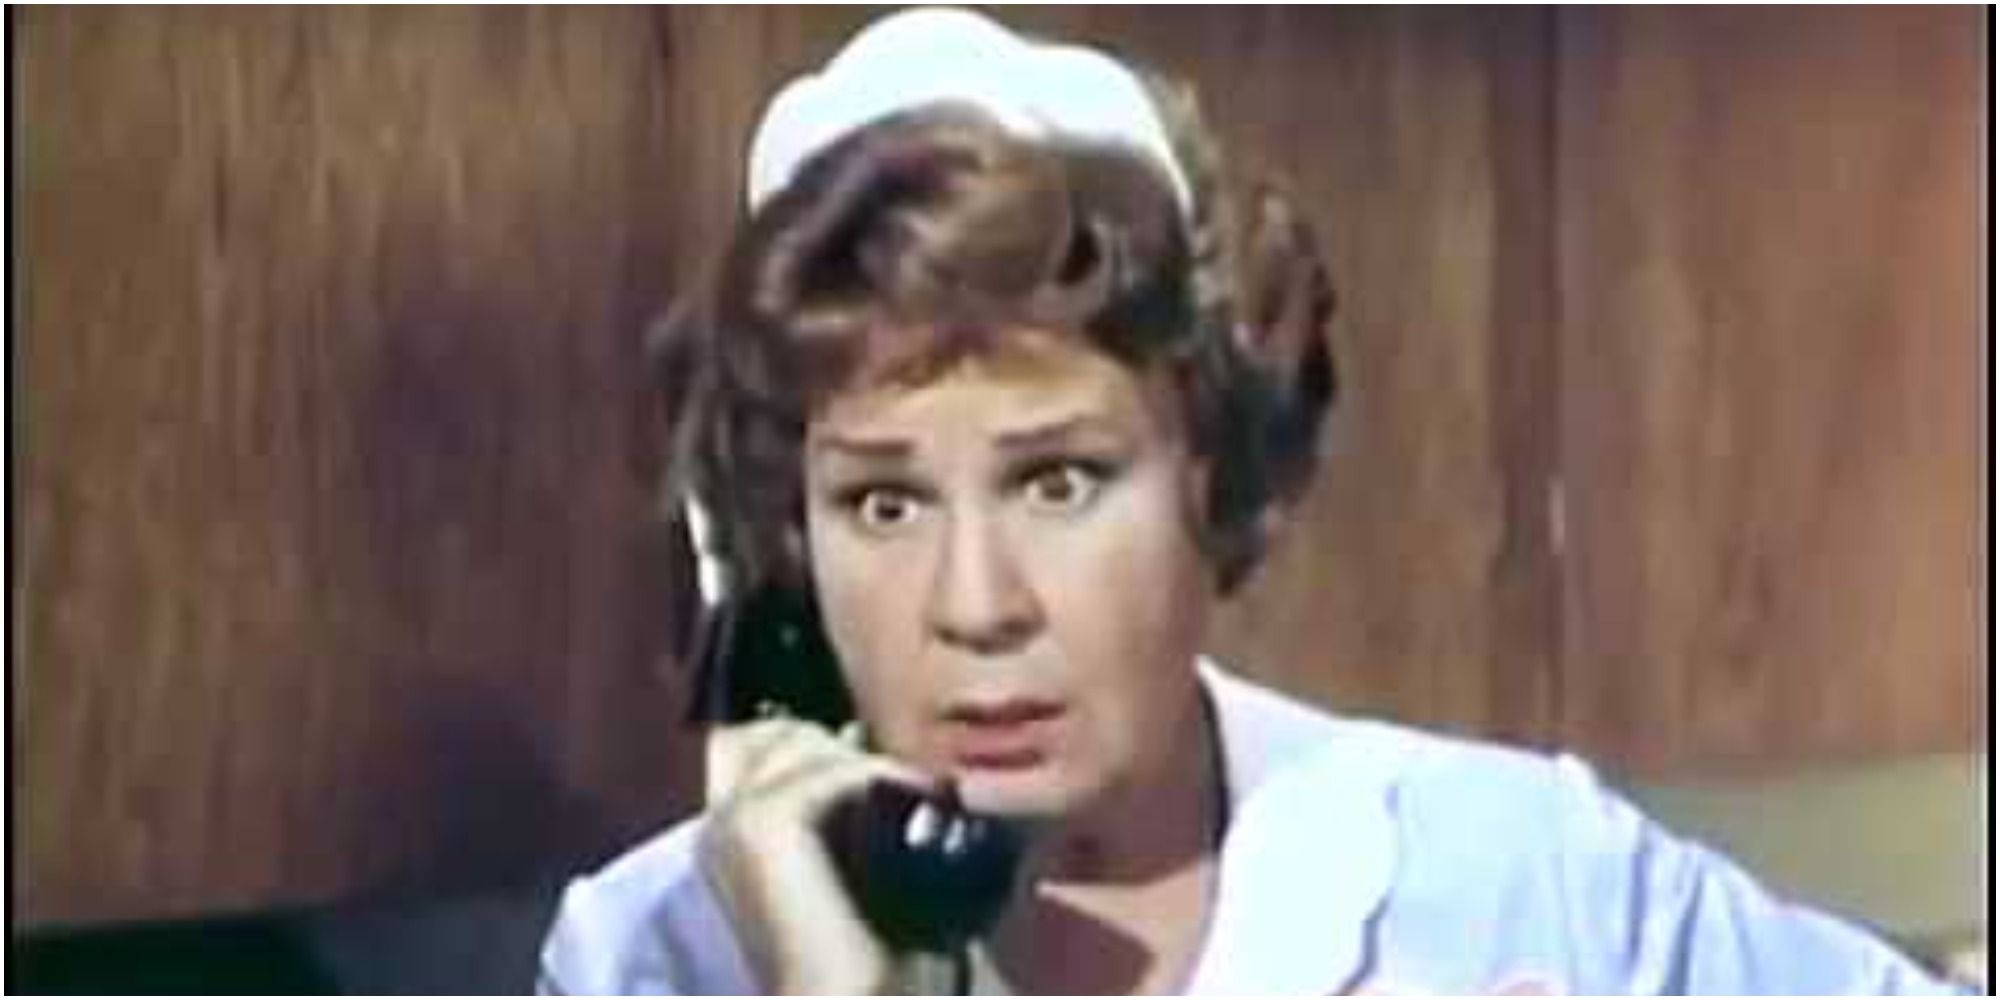 Hazel played by Shirley Booth